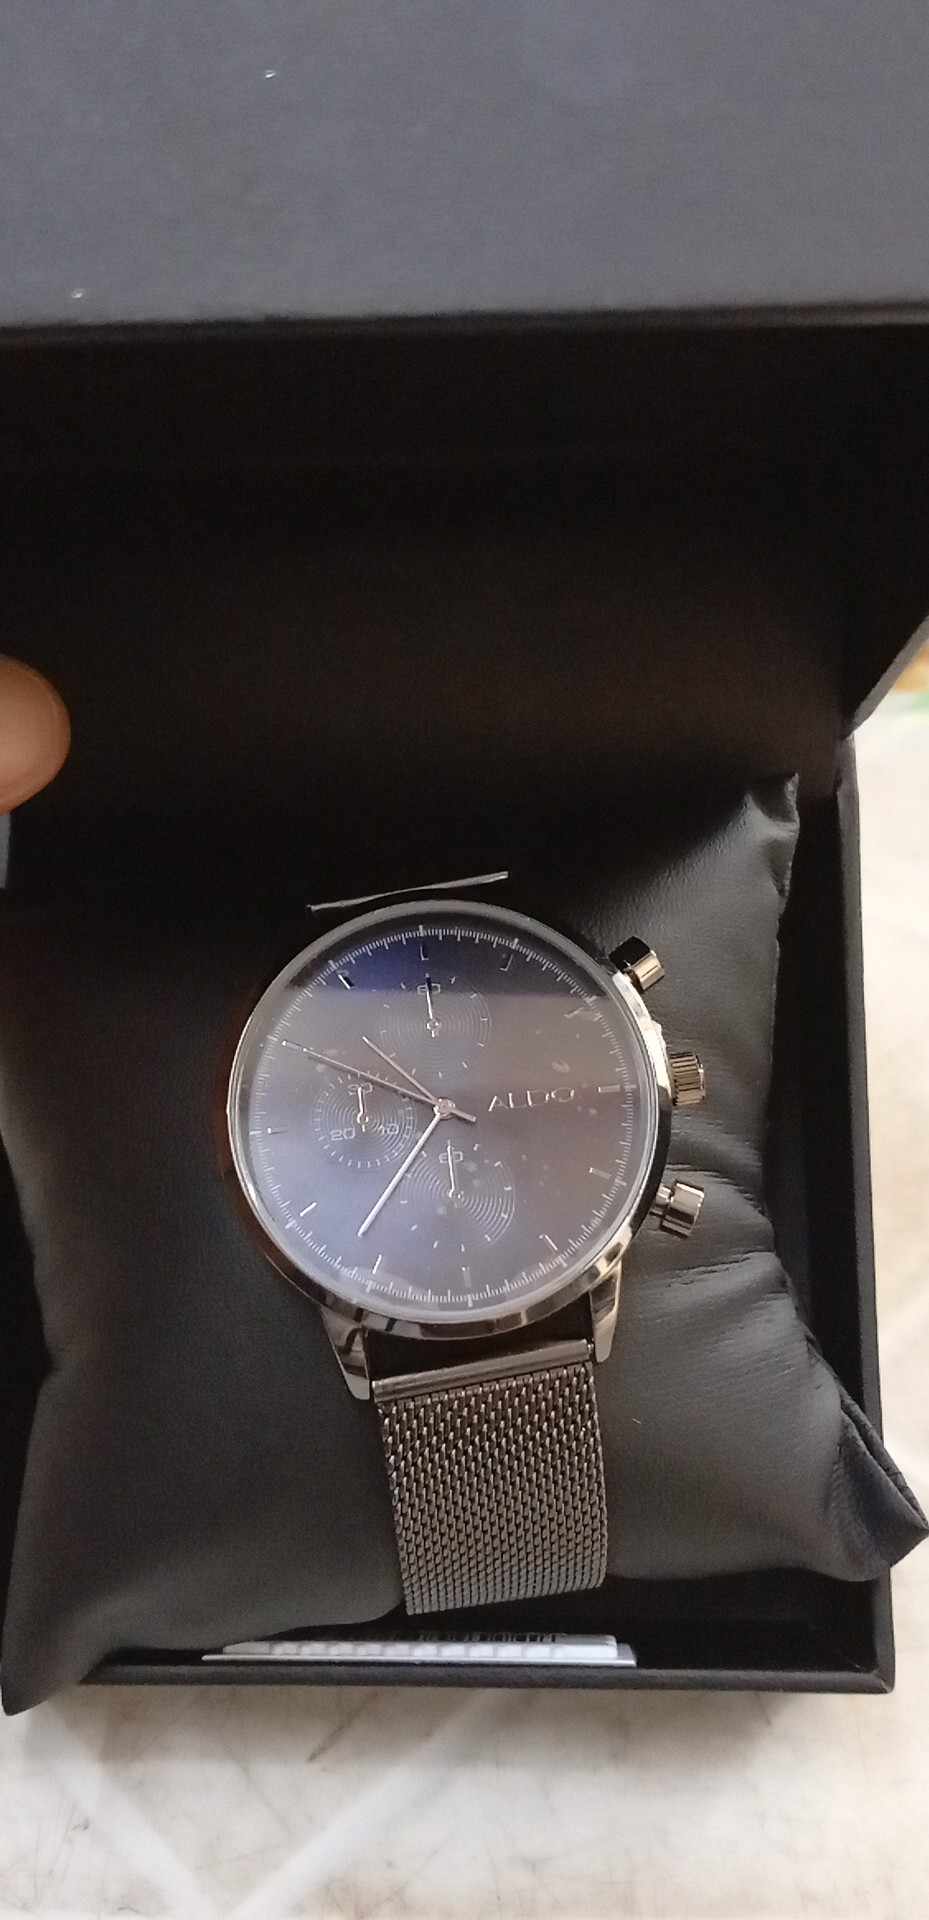 Dad in Cebu City jailed for stealing a watch in a mall